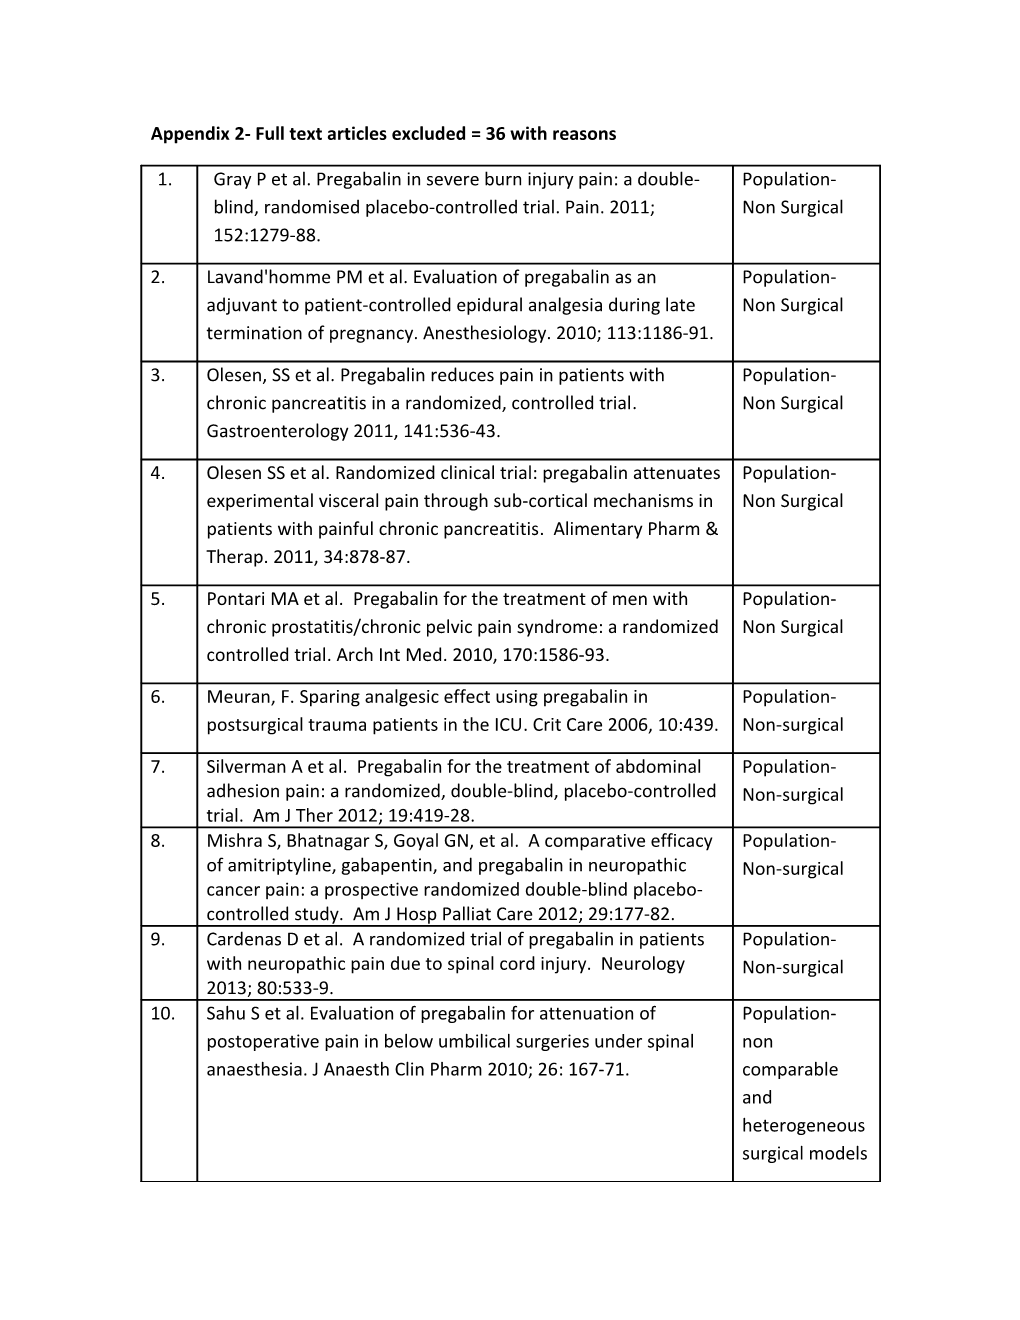 Appendix 2- Full Text Articles Excluded = 36 with Reasons